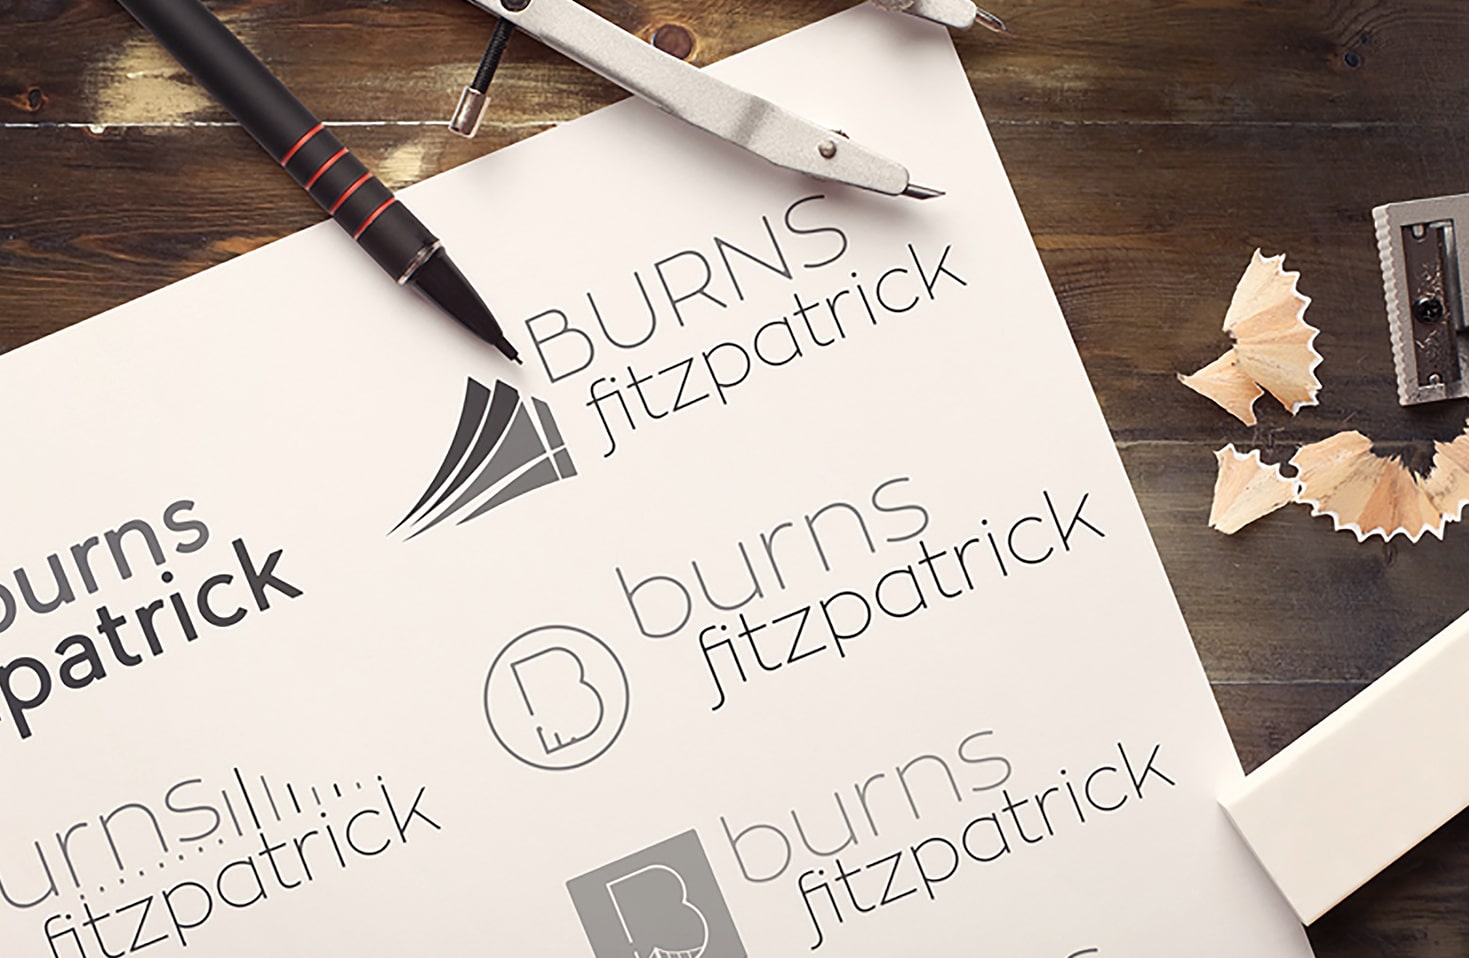 Law firm logos being designed